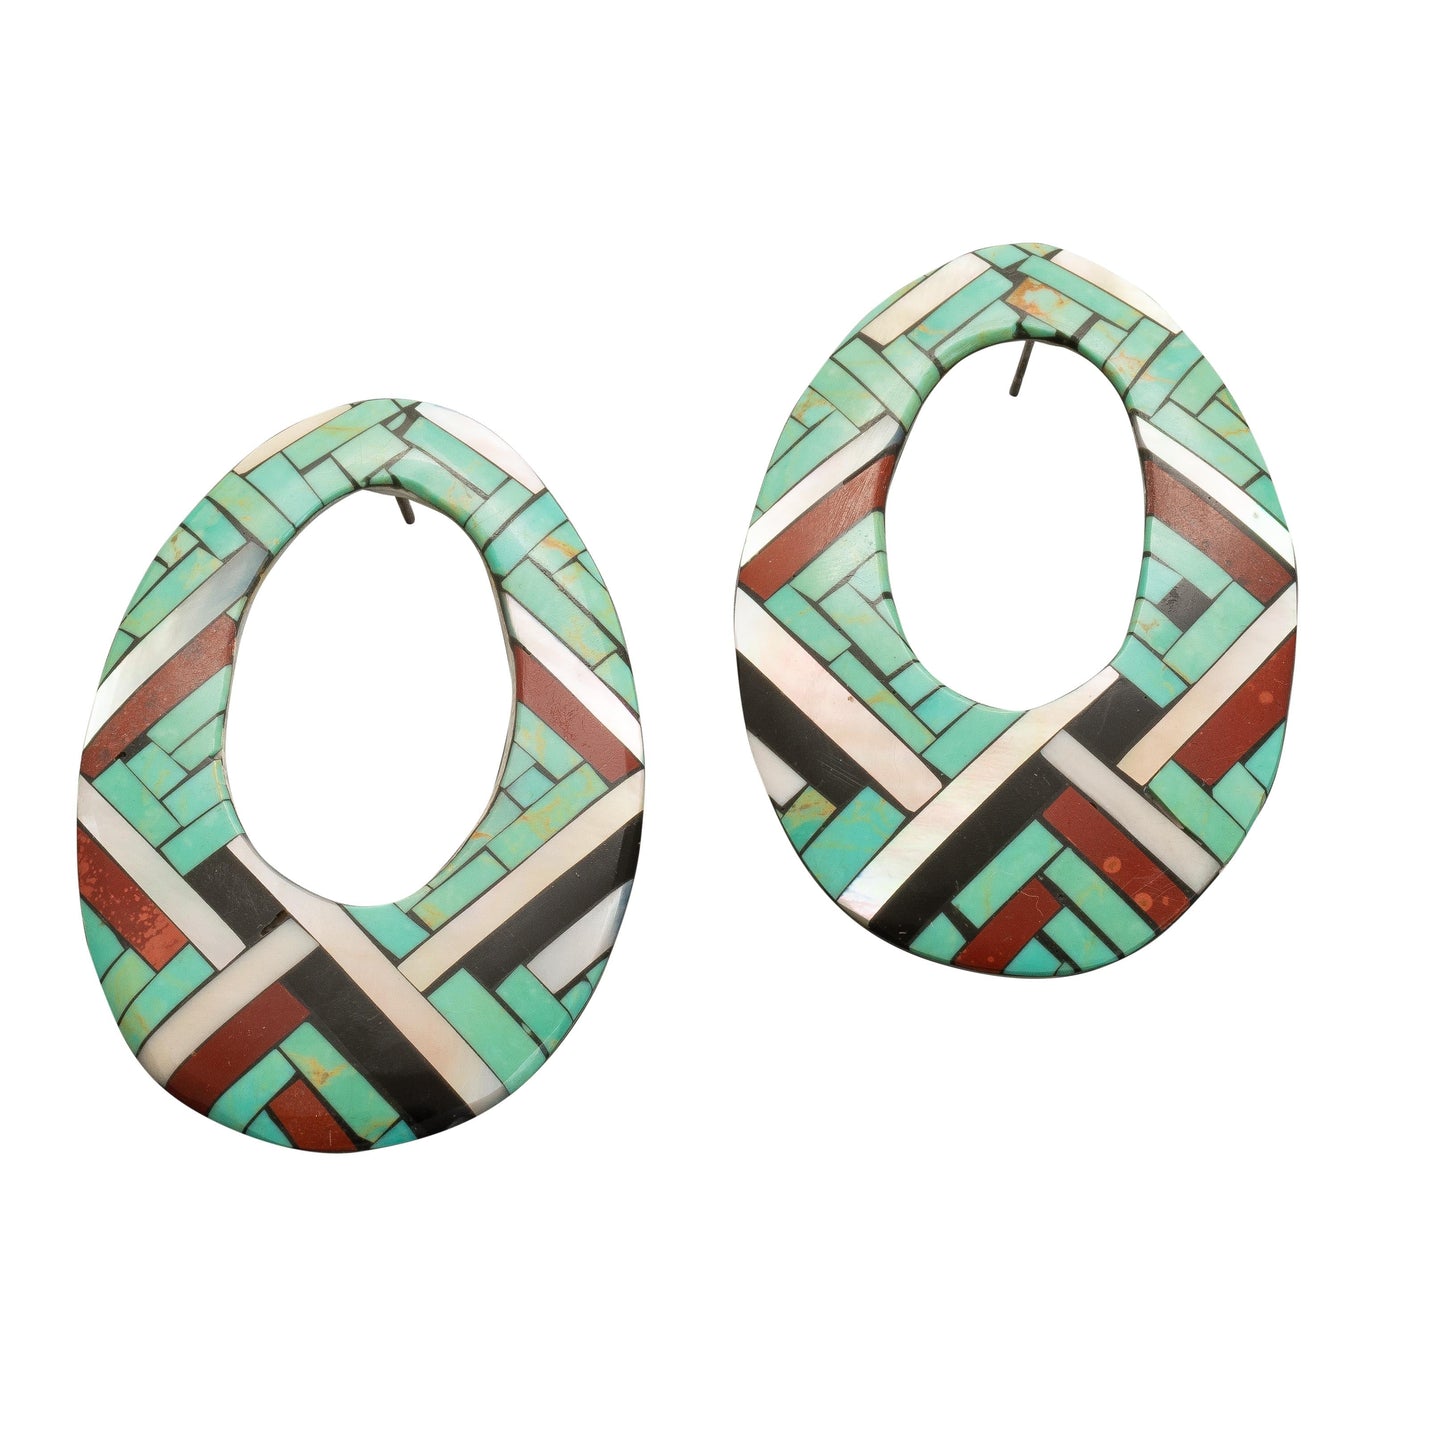 Vintage Angie Reano Owen Statement Earrings of Mosaic Inlay - Turquoise & Tufa